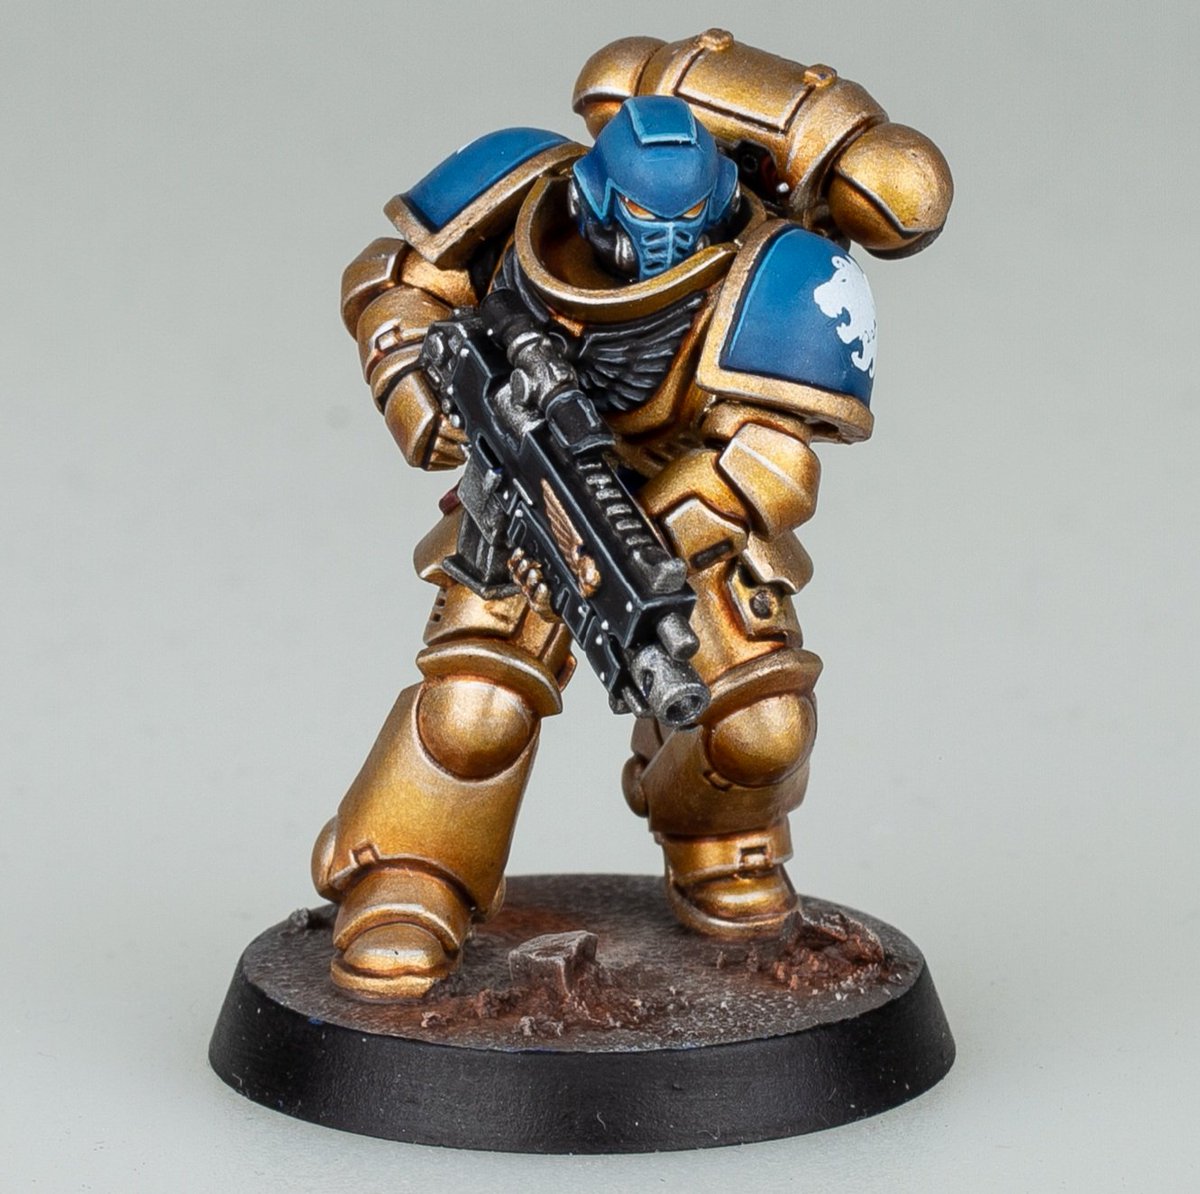 Today a Celestial Lion! I've always wanted to paint a models from that chapter, who is fighting alongside the Emperor's Spears!

#warhammercommunity #citadelminiatures #paintingwarhammer #warhammer #warhammer40k #spacemarine #40k #astartes #new40k